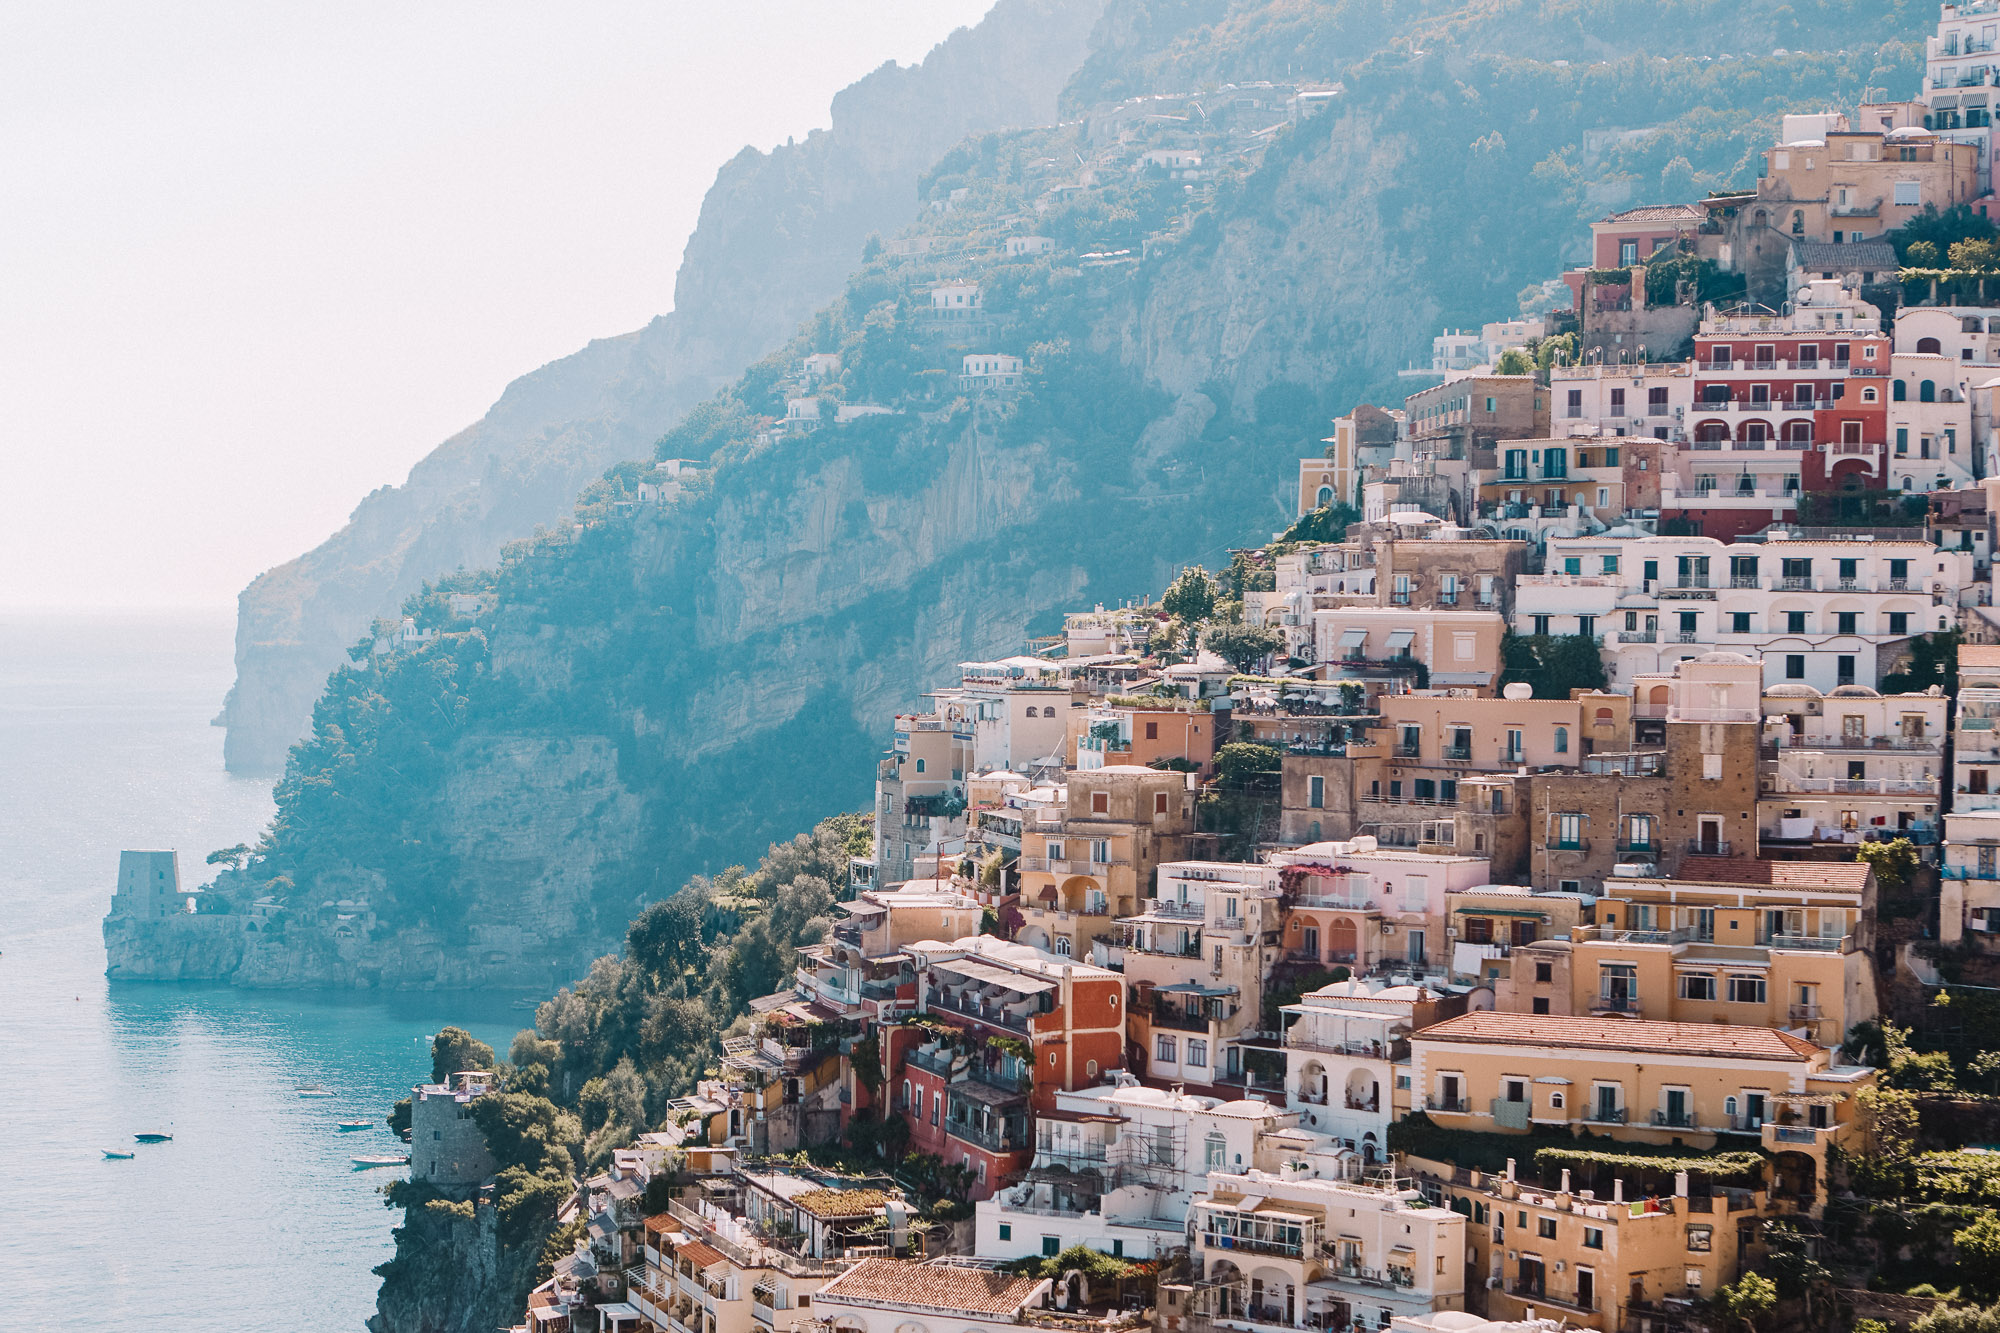 Positano views in italy for our three month Europe road trip